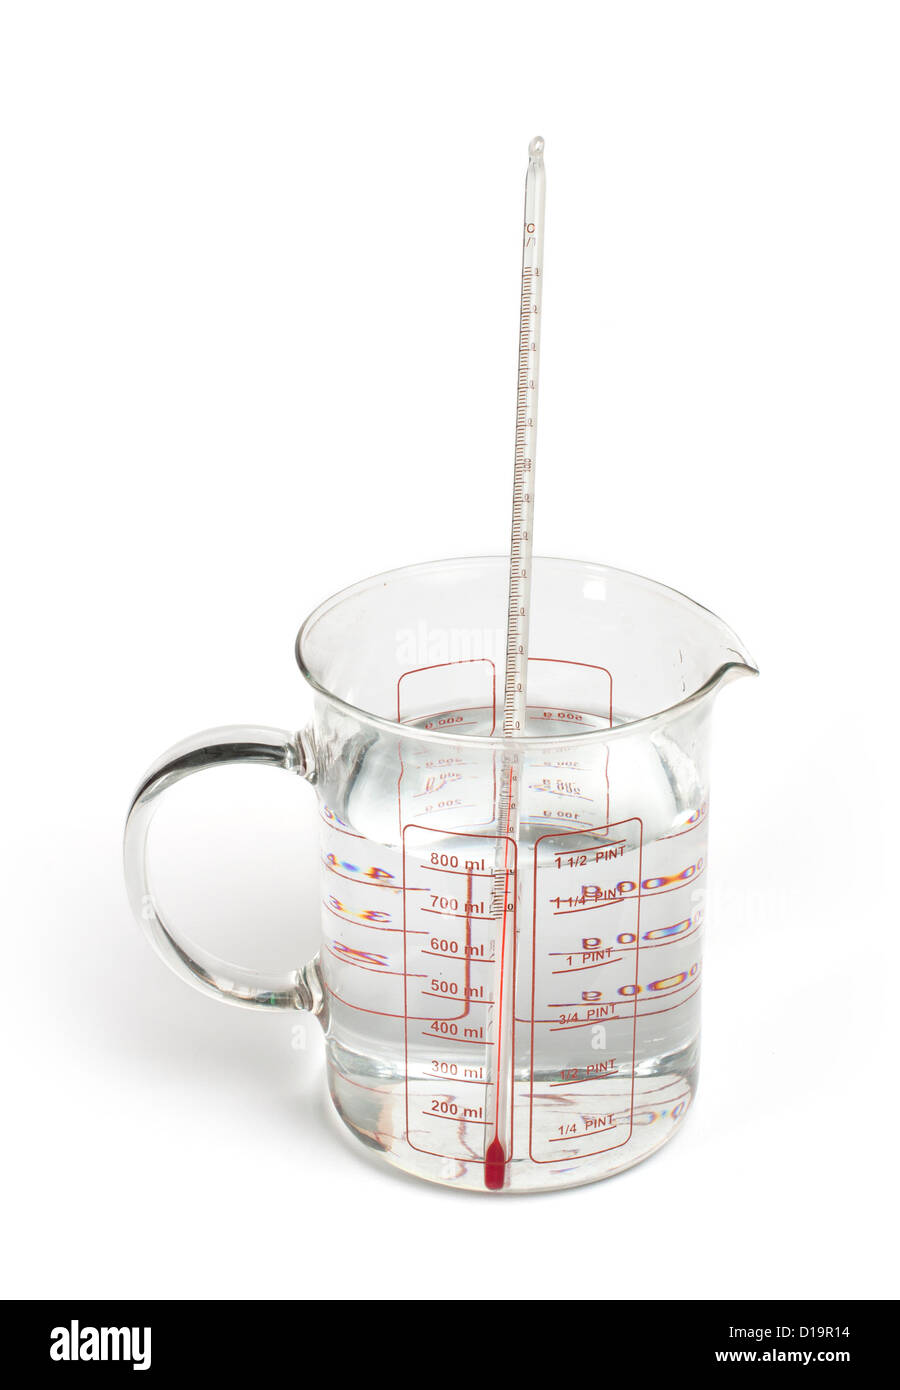 https://c8.alamy.com/comp/D19R14/thermometer-measures-the-temperature-of-the-water-in-beaker-with-scale-D19R14.jpg